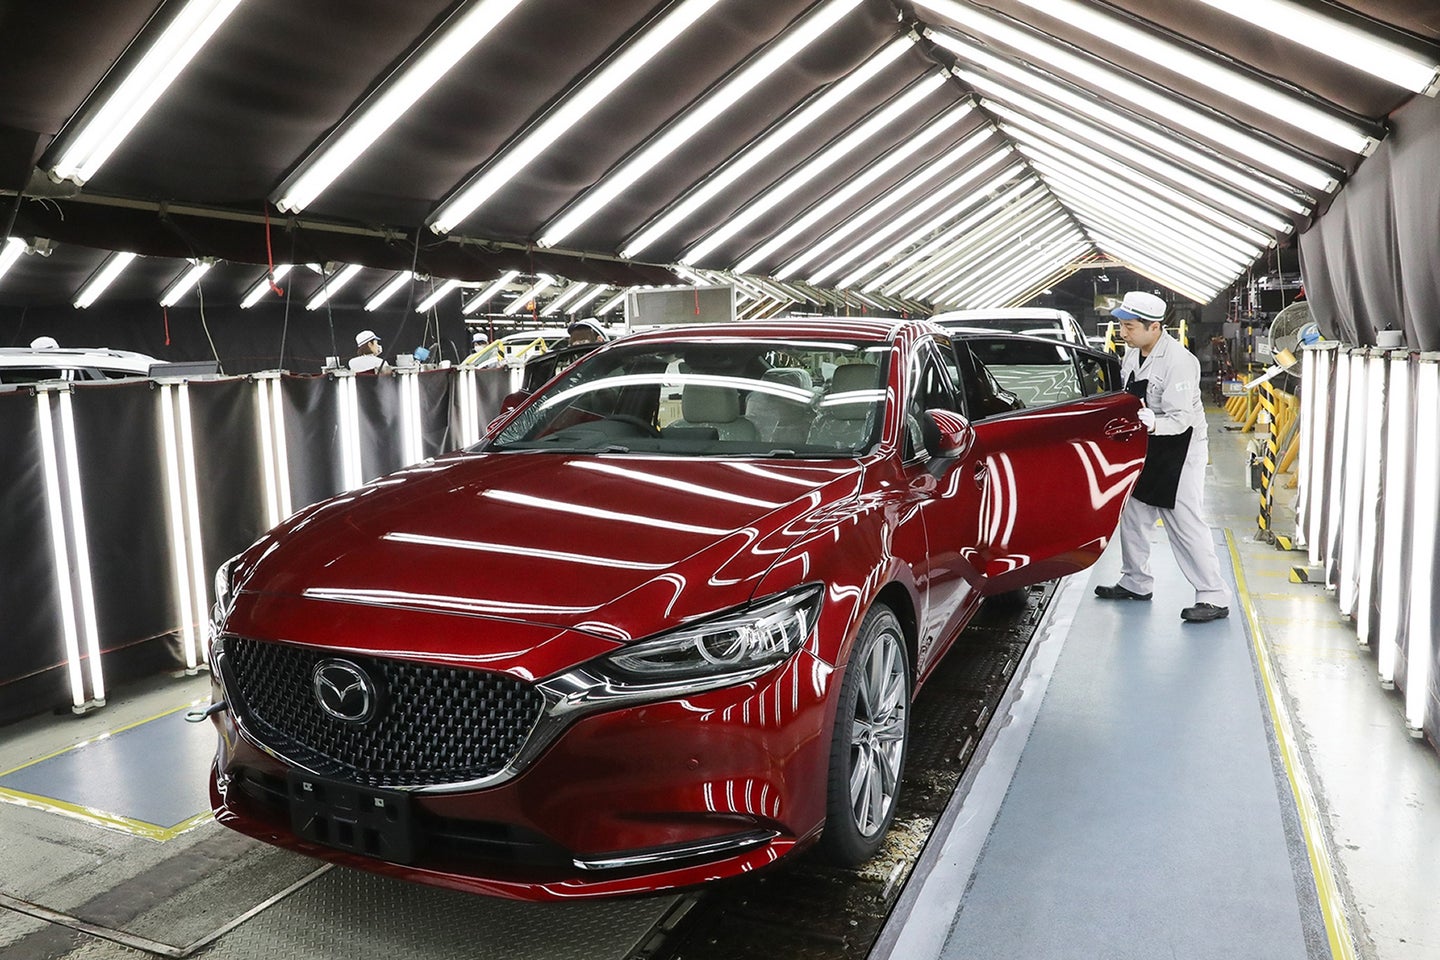 Mazda, Saudi Oil Company Will Jointly Research Emissions Reductions for Internal-Combustion Cars